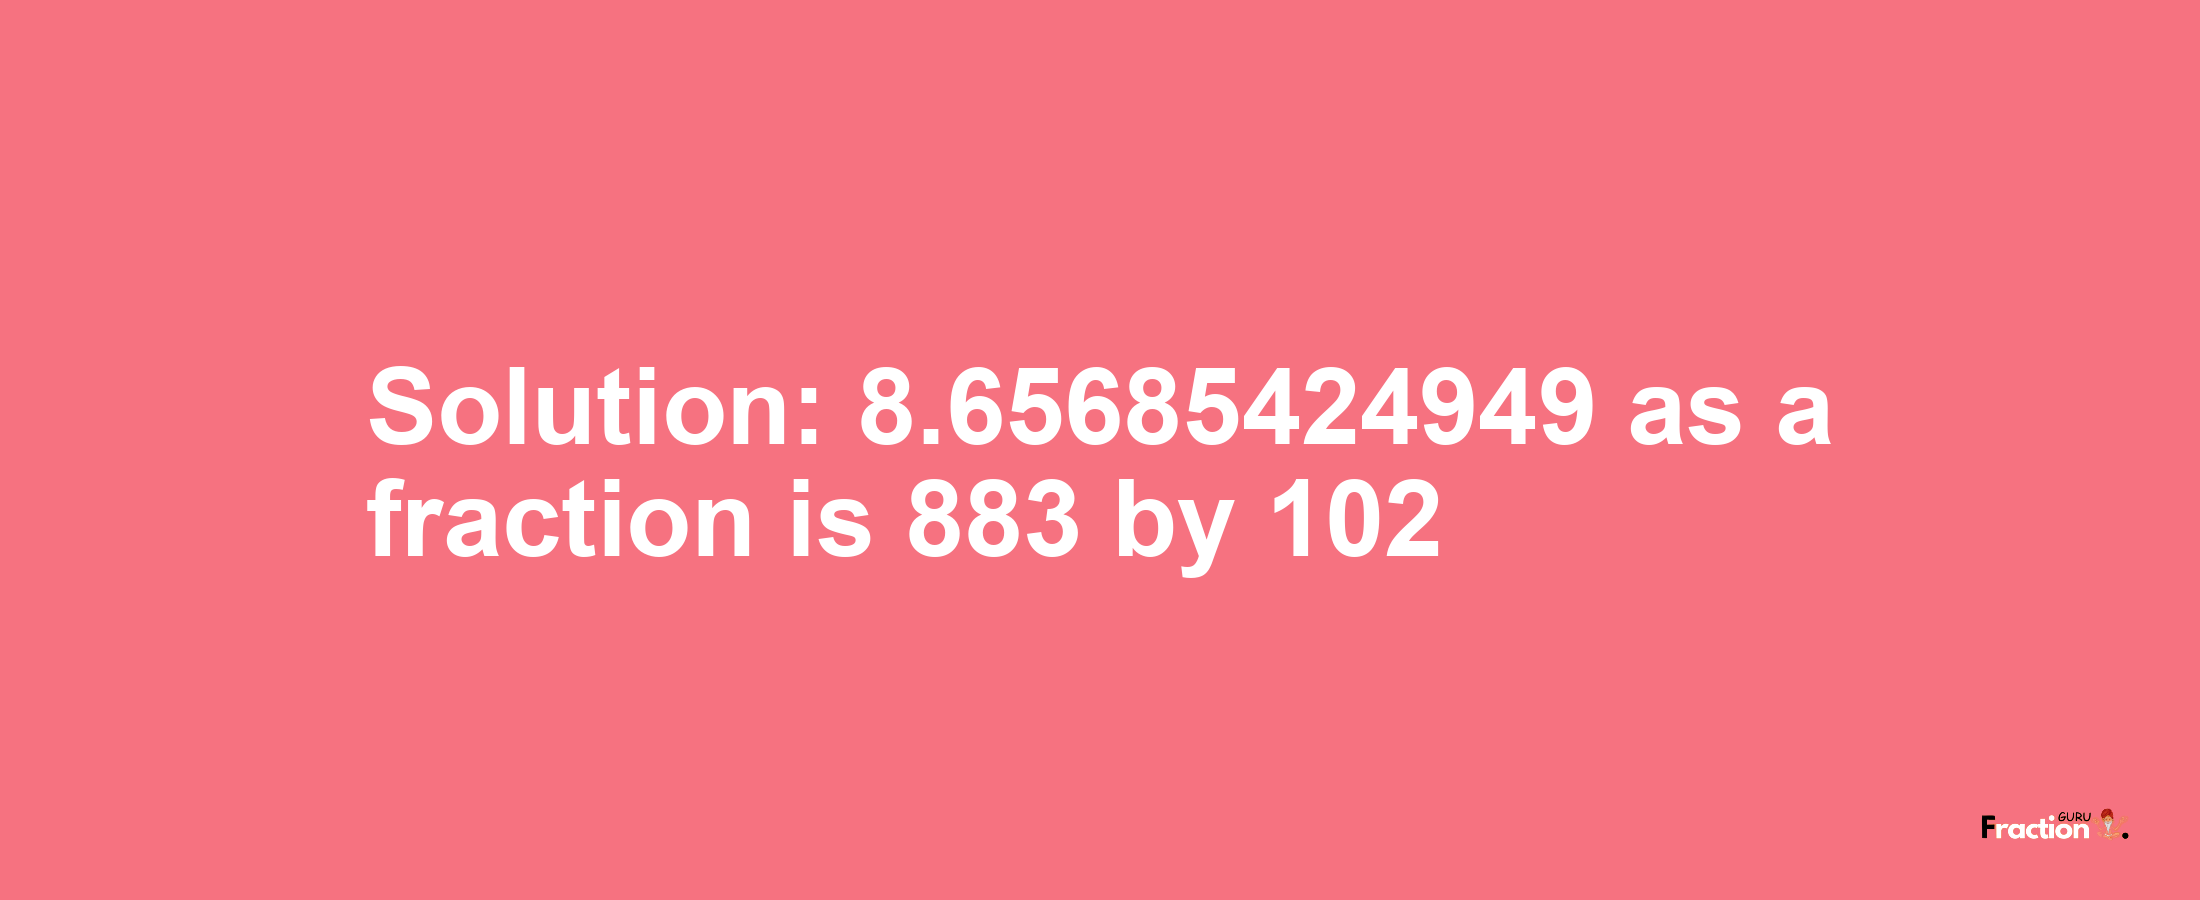 Solution:8.65685424949 as a fraction is 883/102